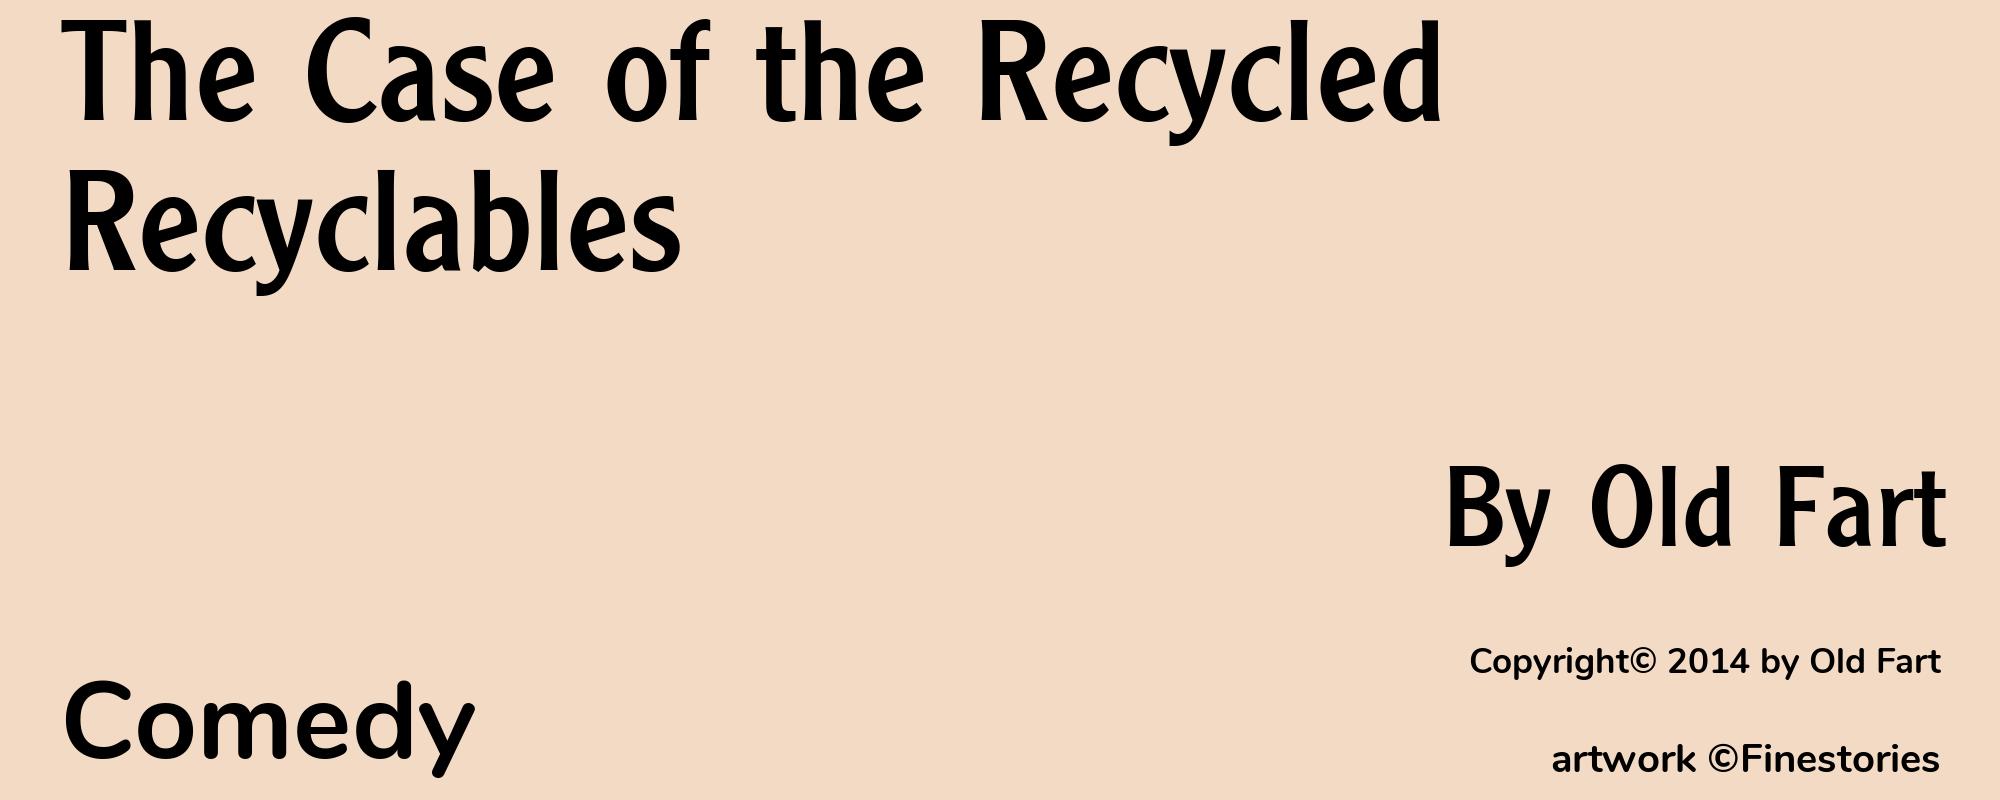 The Case of the Recycled Recyclables - Cover